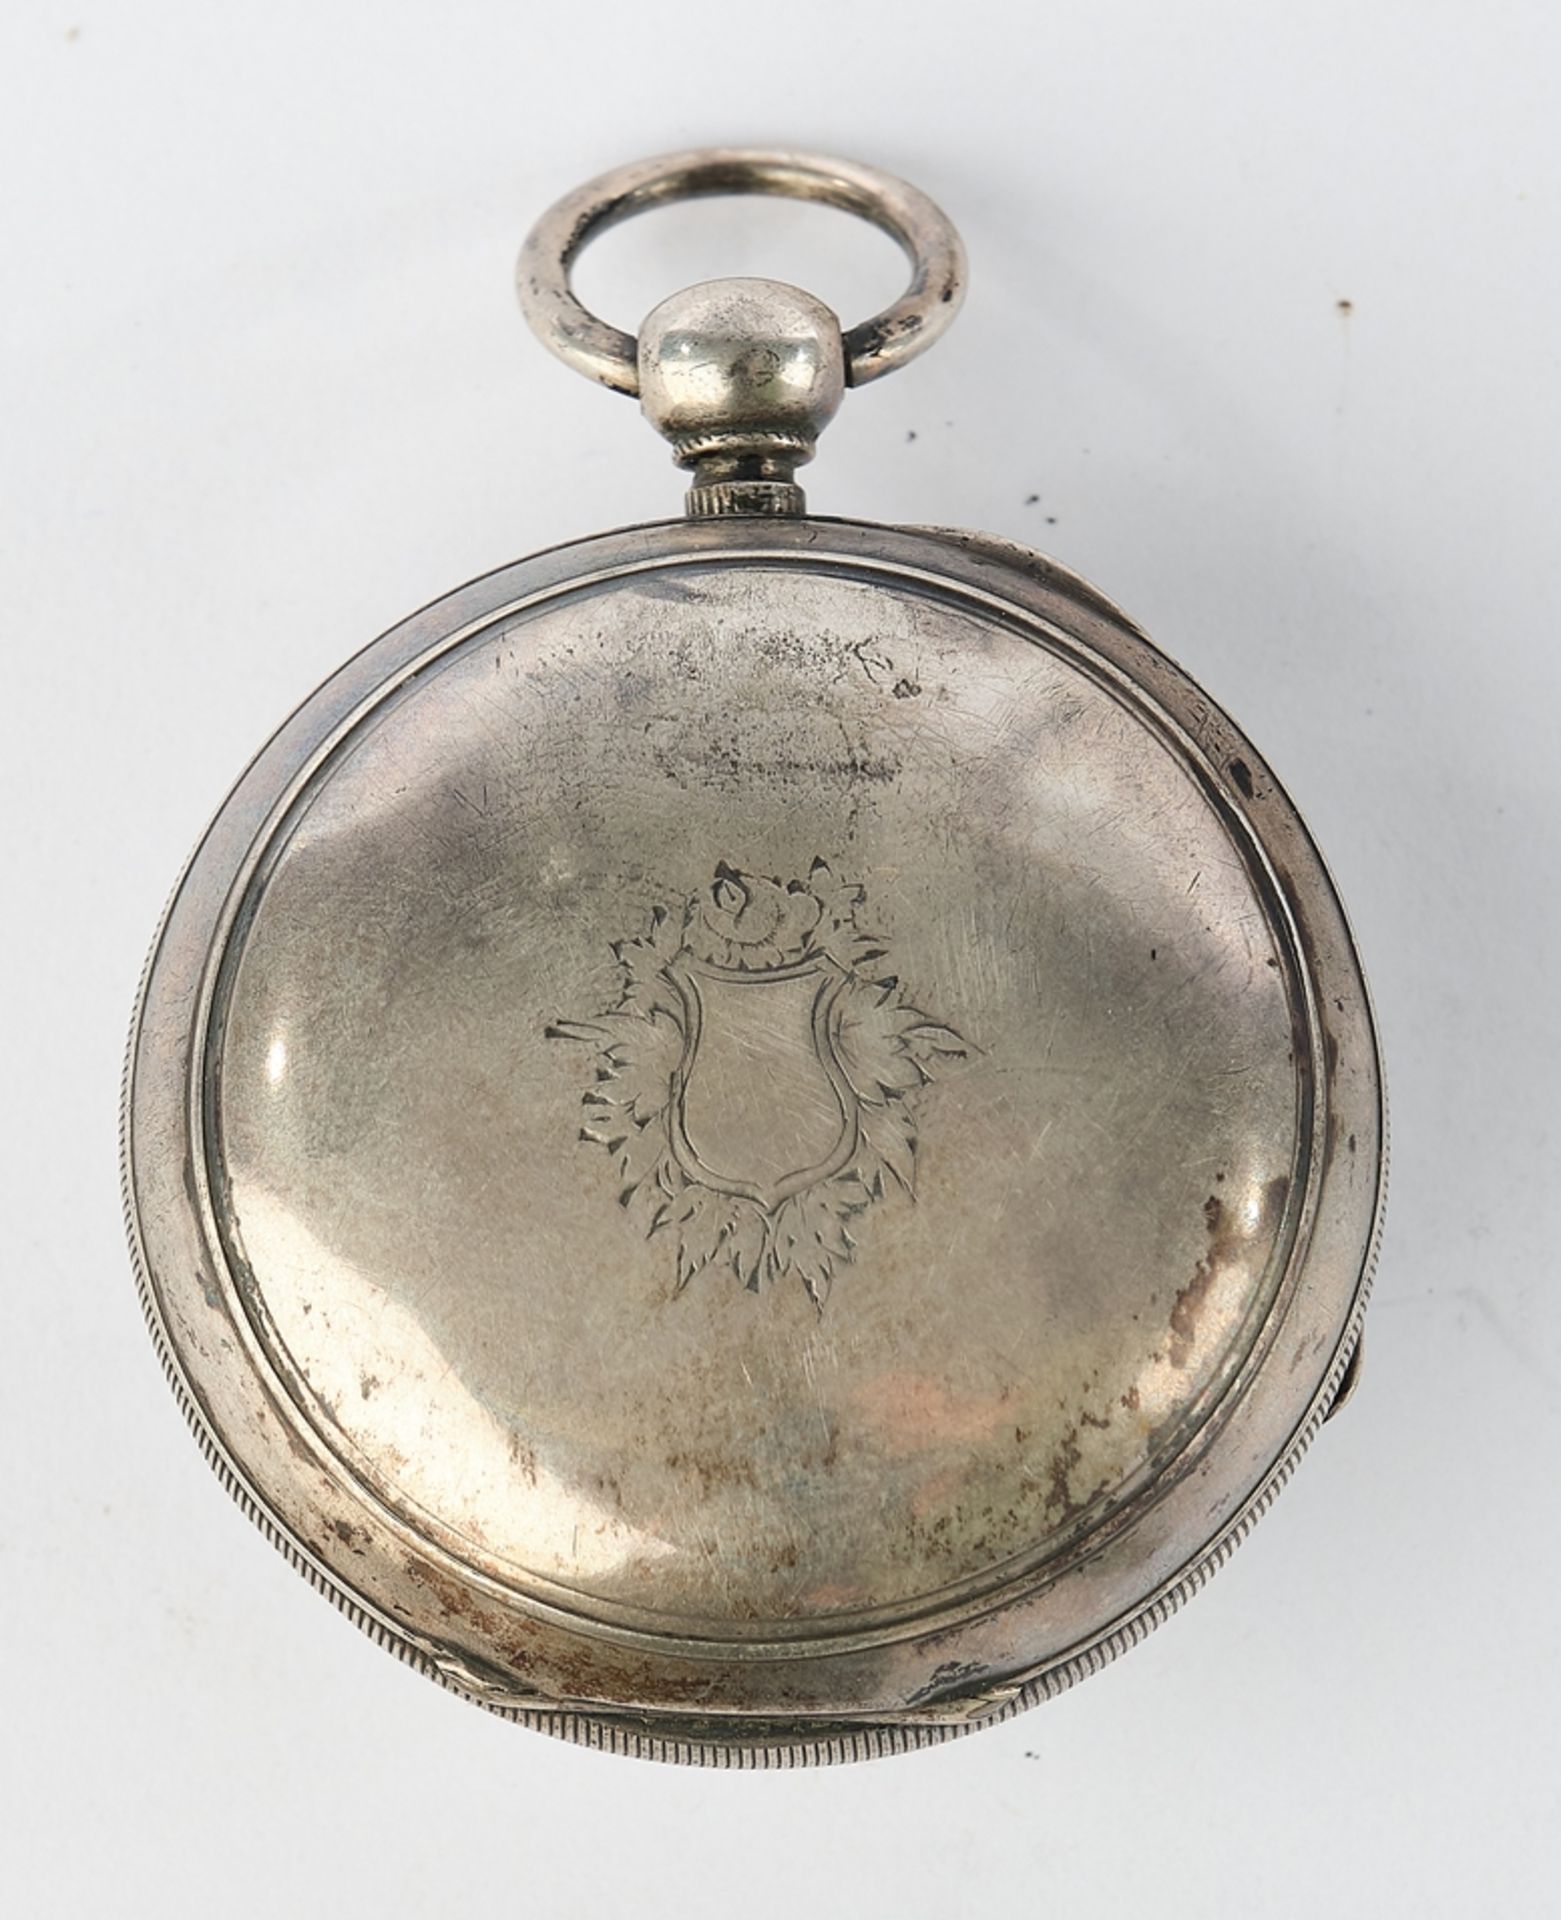 Pocket watch, Switzerland / France, 18th century, silver case, movement sign. "Tschiffely / Saine", - Image 3 of 6